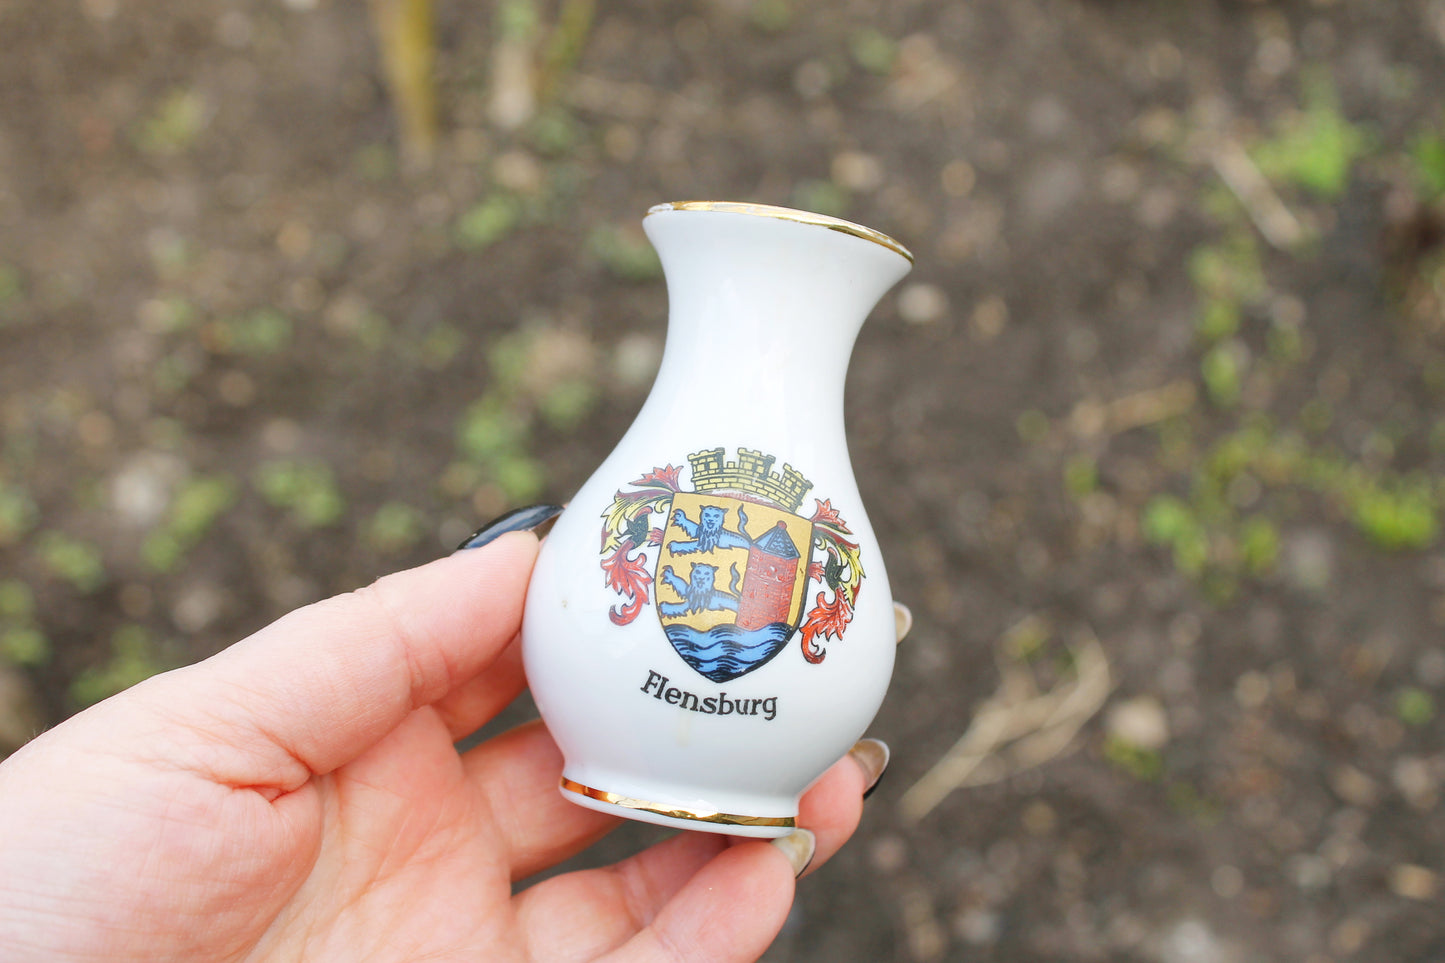 Vintage porcelain small vase - Flensburg town - 3.4 inches - made in Germany - cute vintage mini vase - 1980s